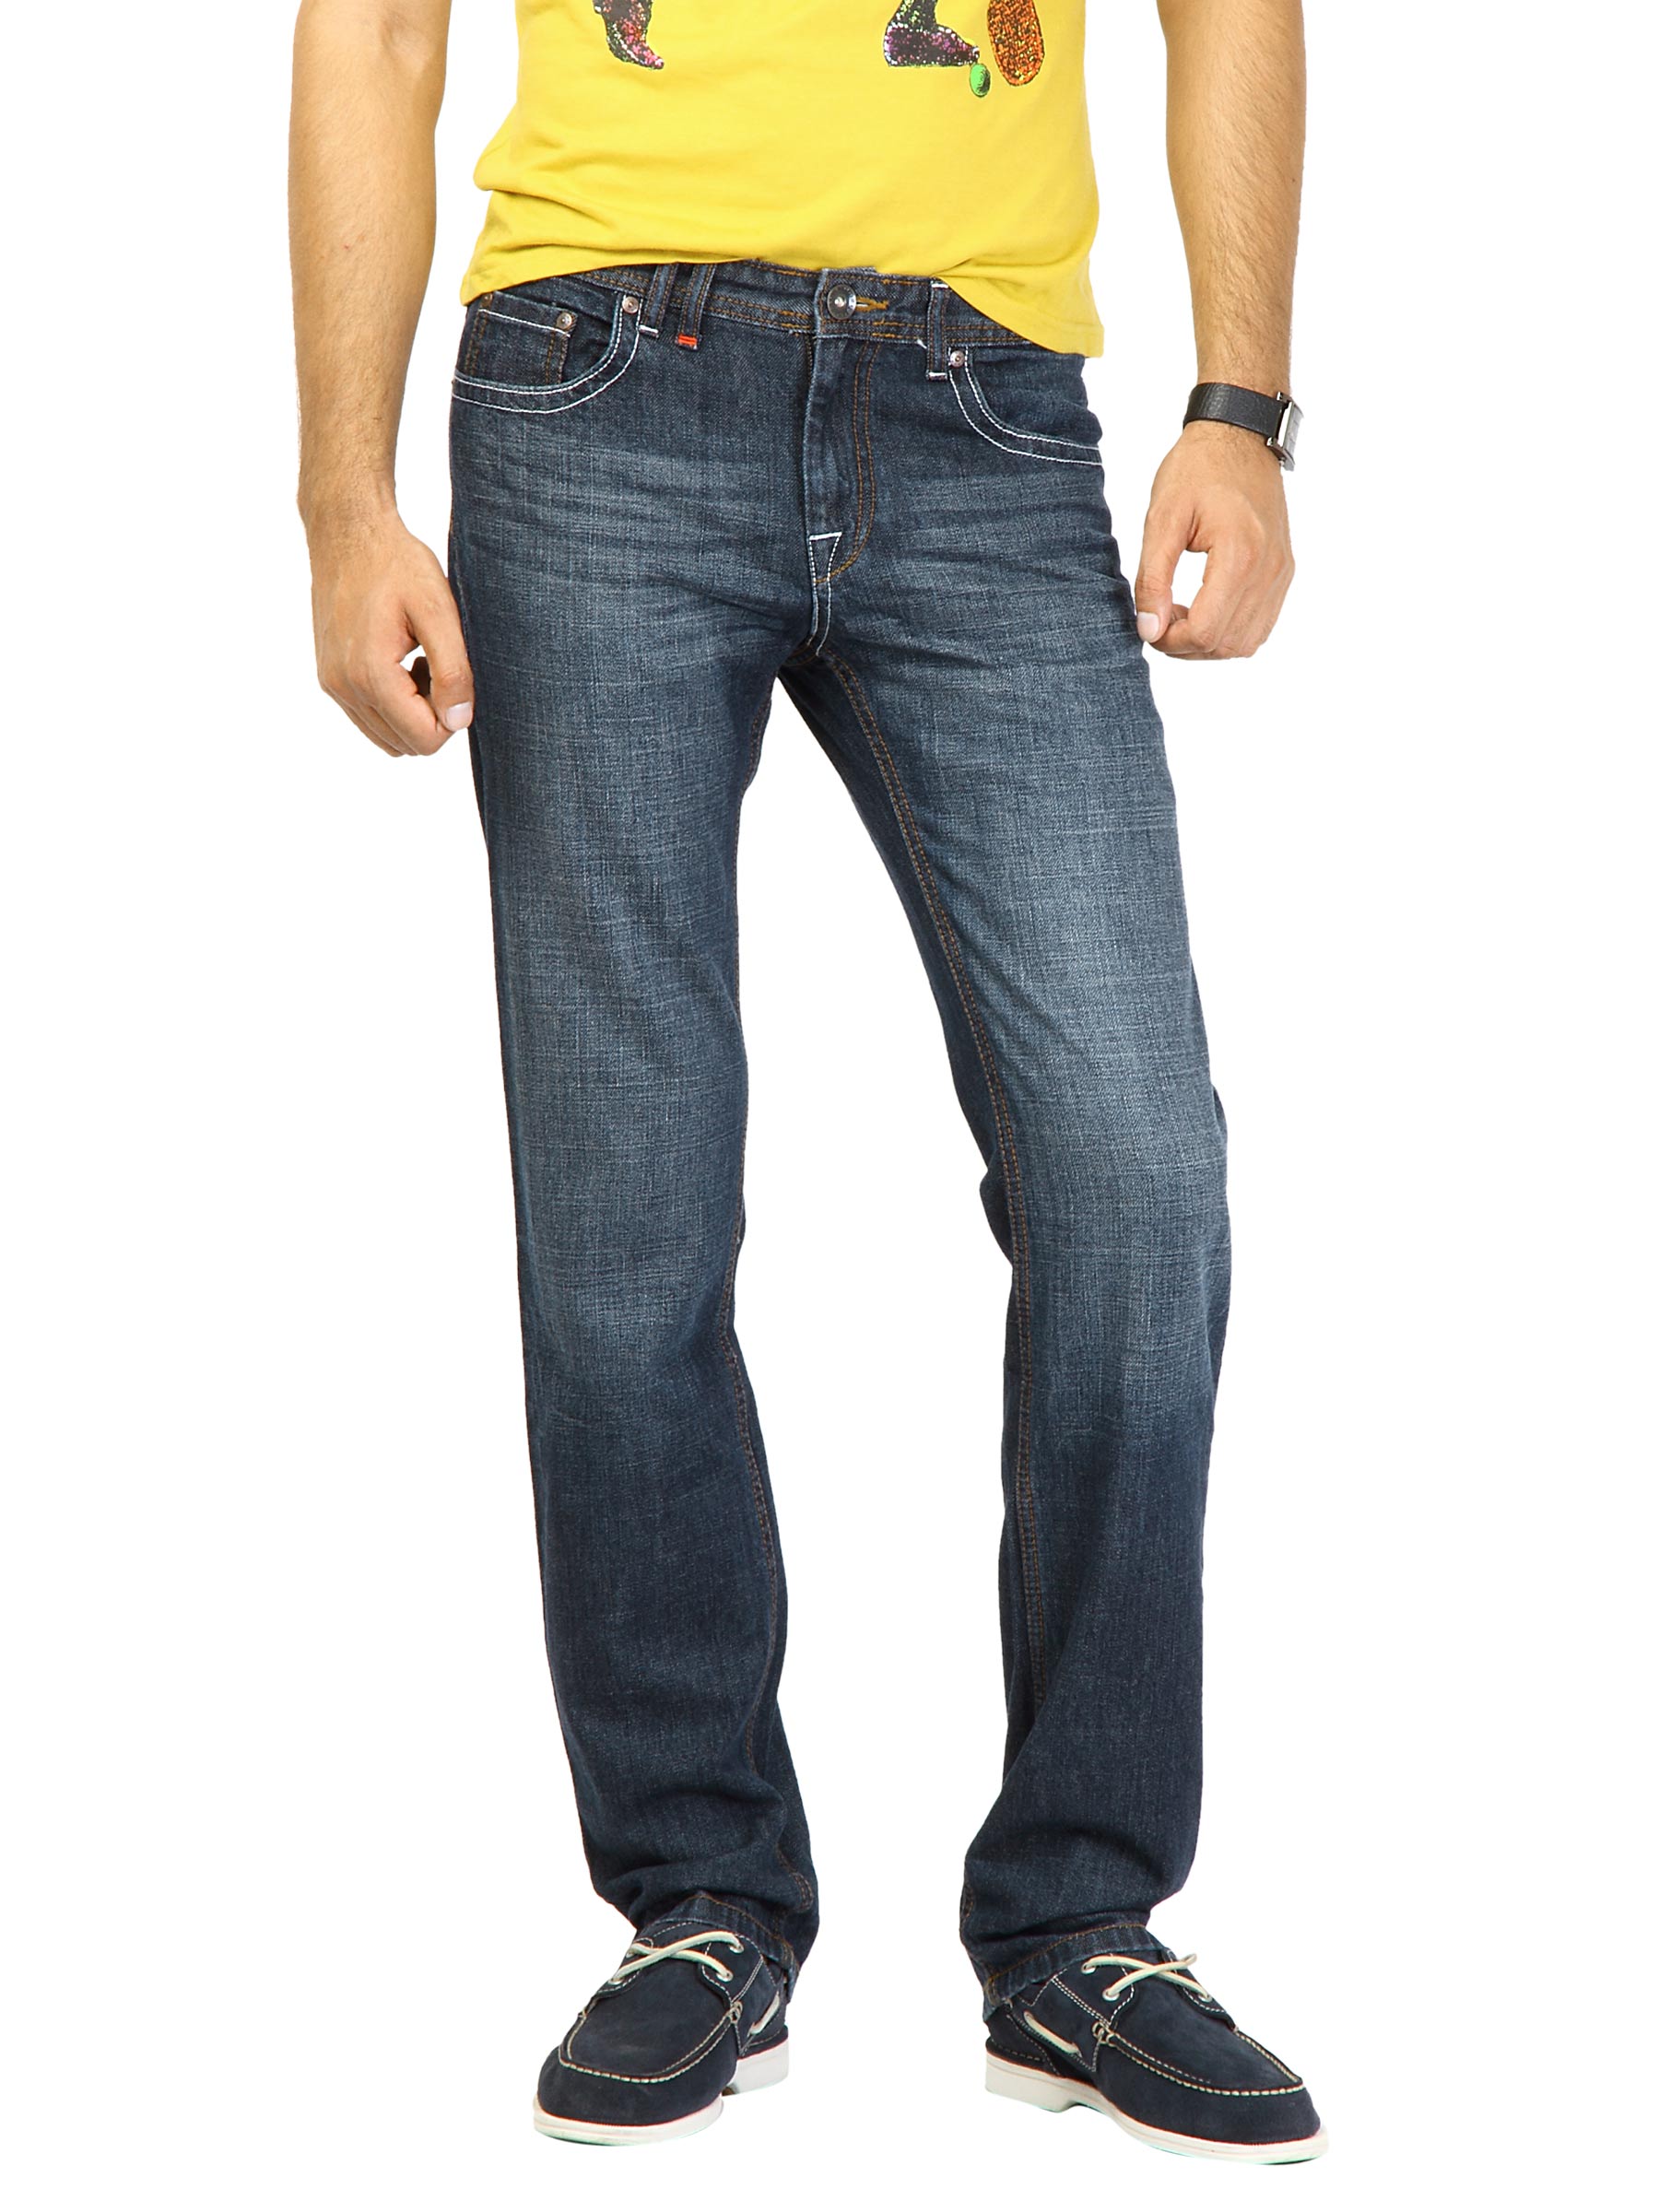 United Colors of Benetton Men Washed Navy Blue Jeans